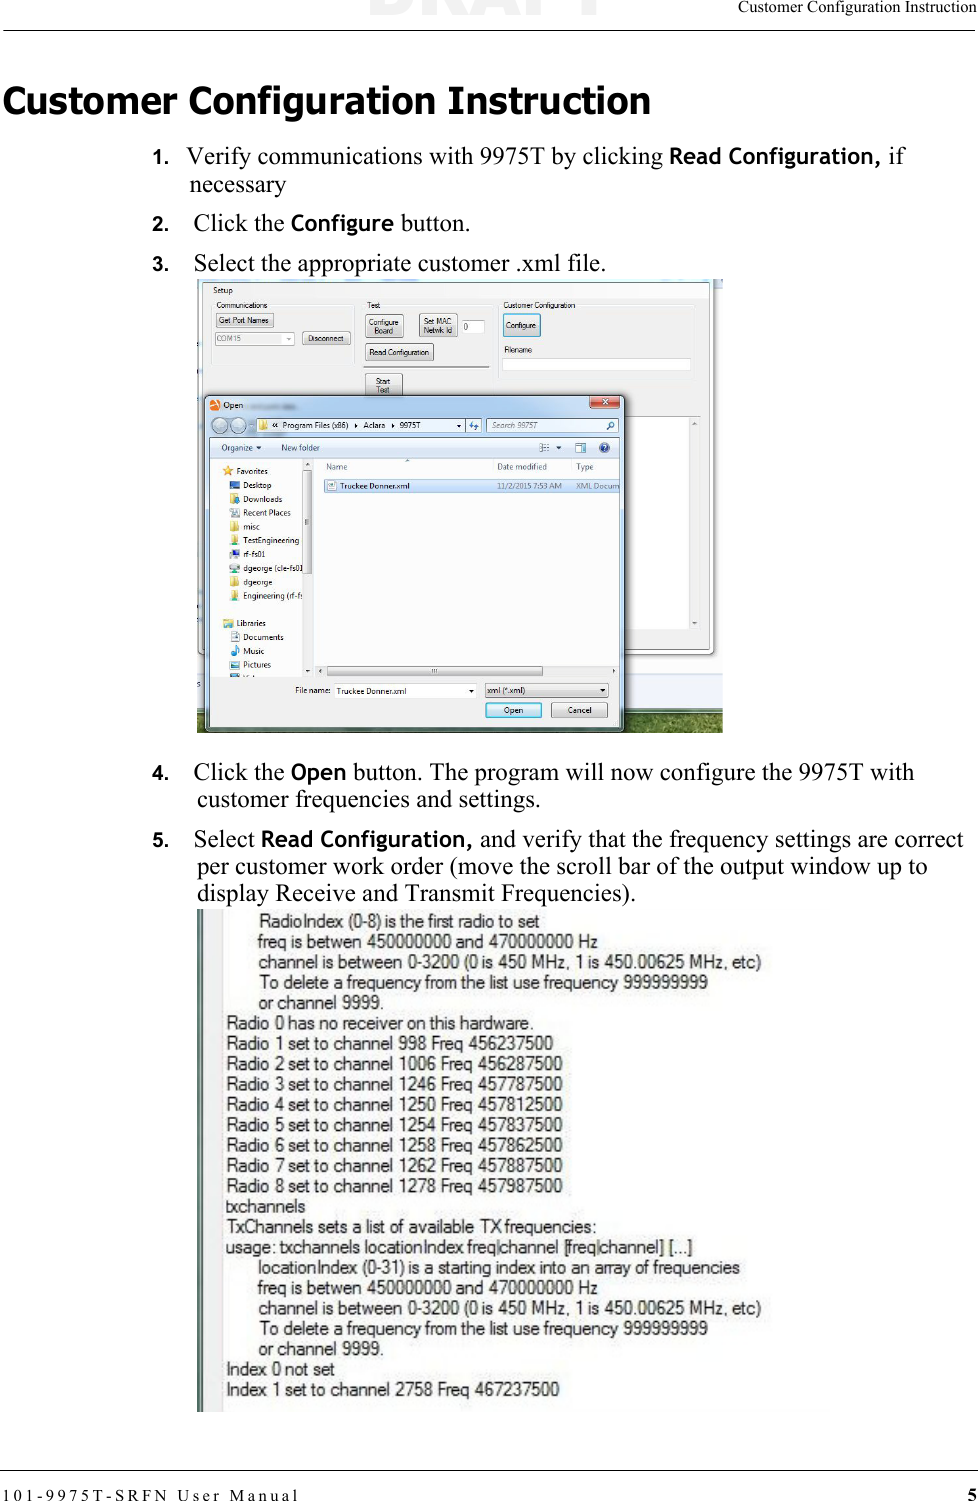  Customer Configuration Instruction101-9975T-SRFN User Manual 5Customer Configuration Instruction1.   Verify communications with 9975T by clicking Read Configuration, if necessary2.   Click the Configure button.3.   Select the appropriate customer .xml file.4.   Click the Open button. The program will now configure the 9975T with customer frequencies and settings.5.   Select Read Configuration, and verify that the frequency settings are correct per customer work order (move the scroll bar of the output window up to display Receive and Transmit Frequencies).DRAFT